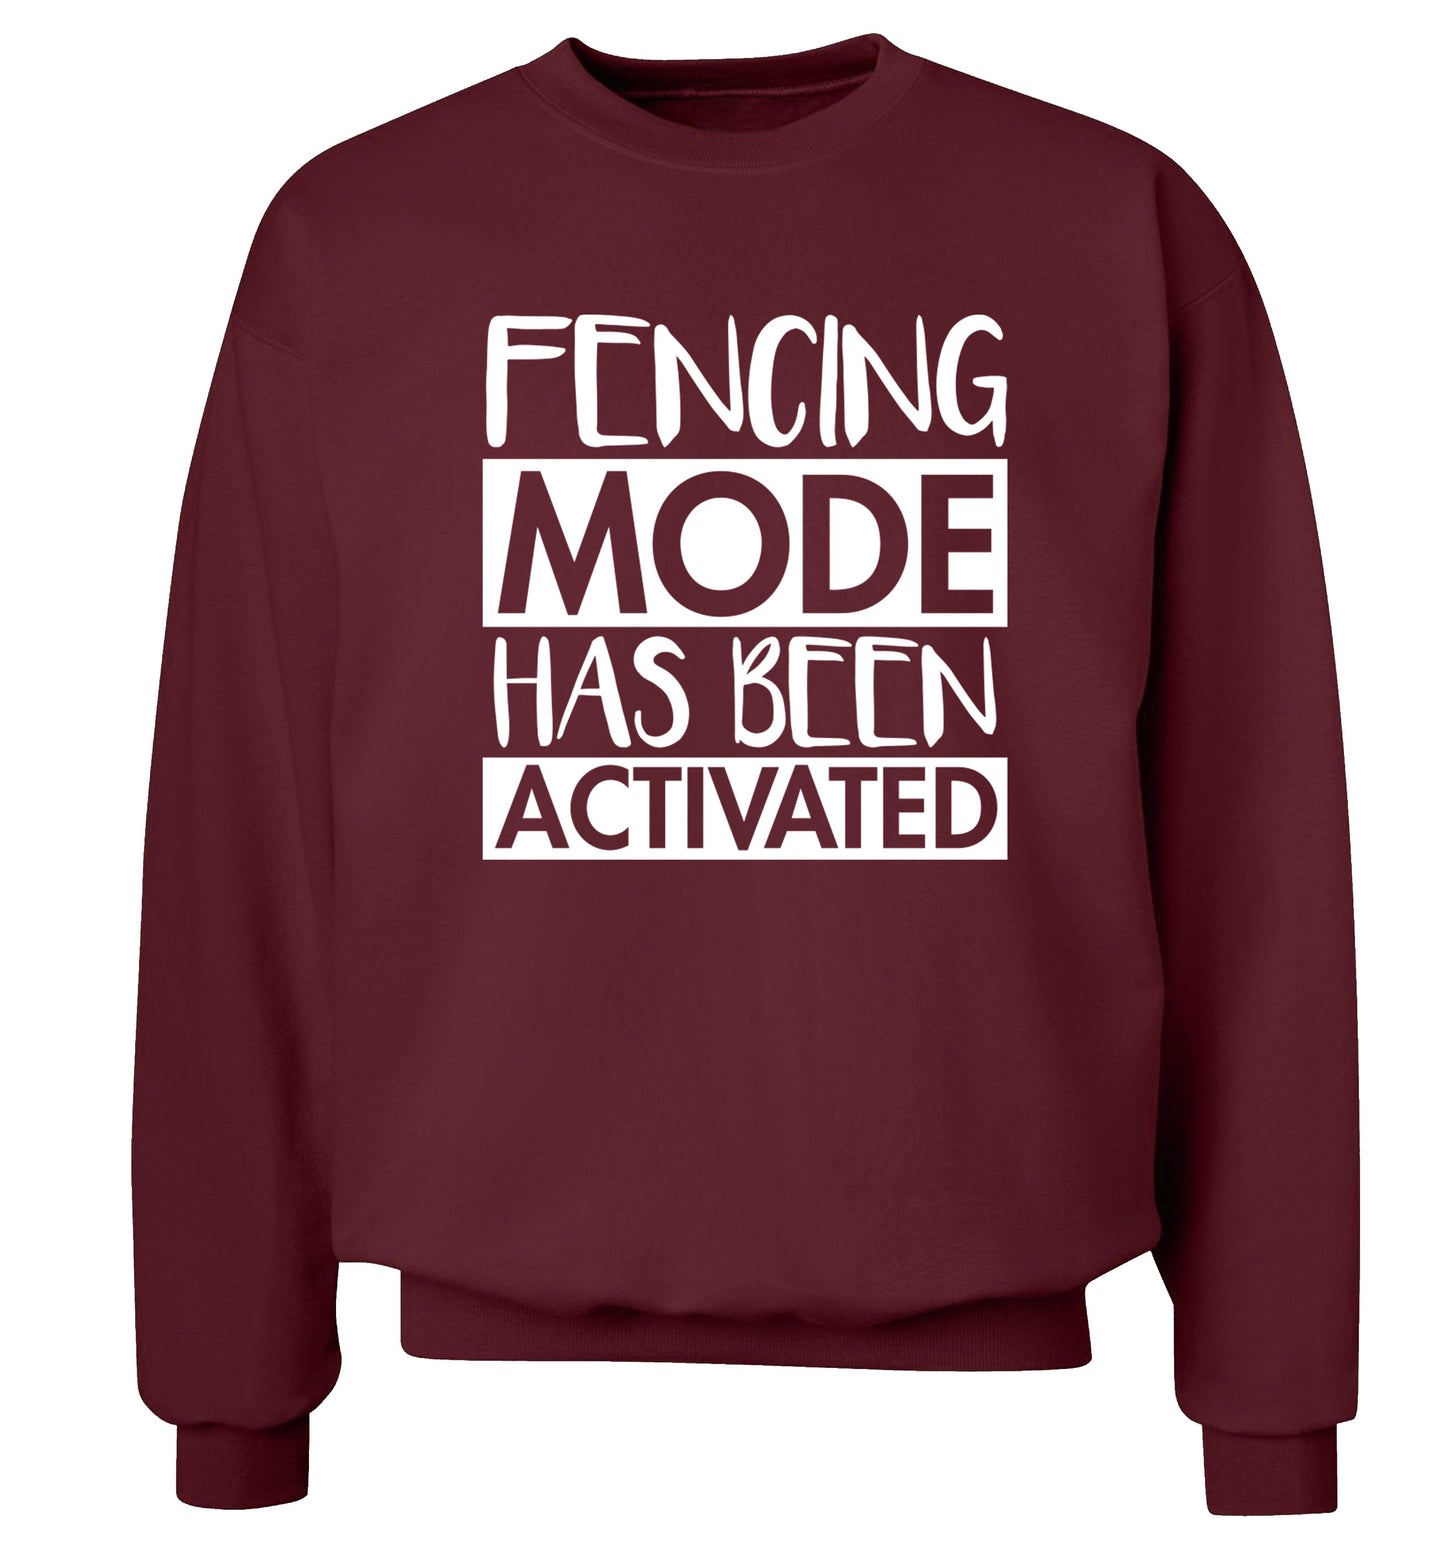 Fencing mode activated Adult's unisex maroon Sweater 2XL